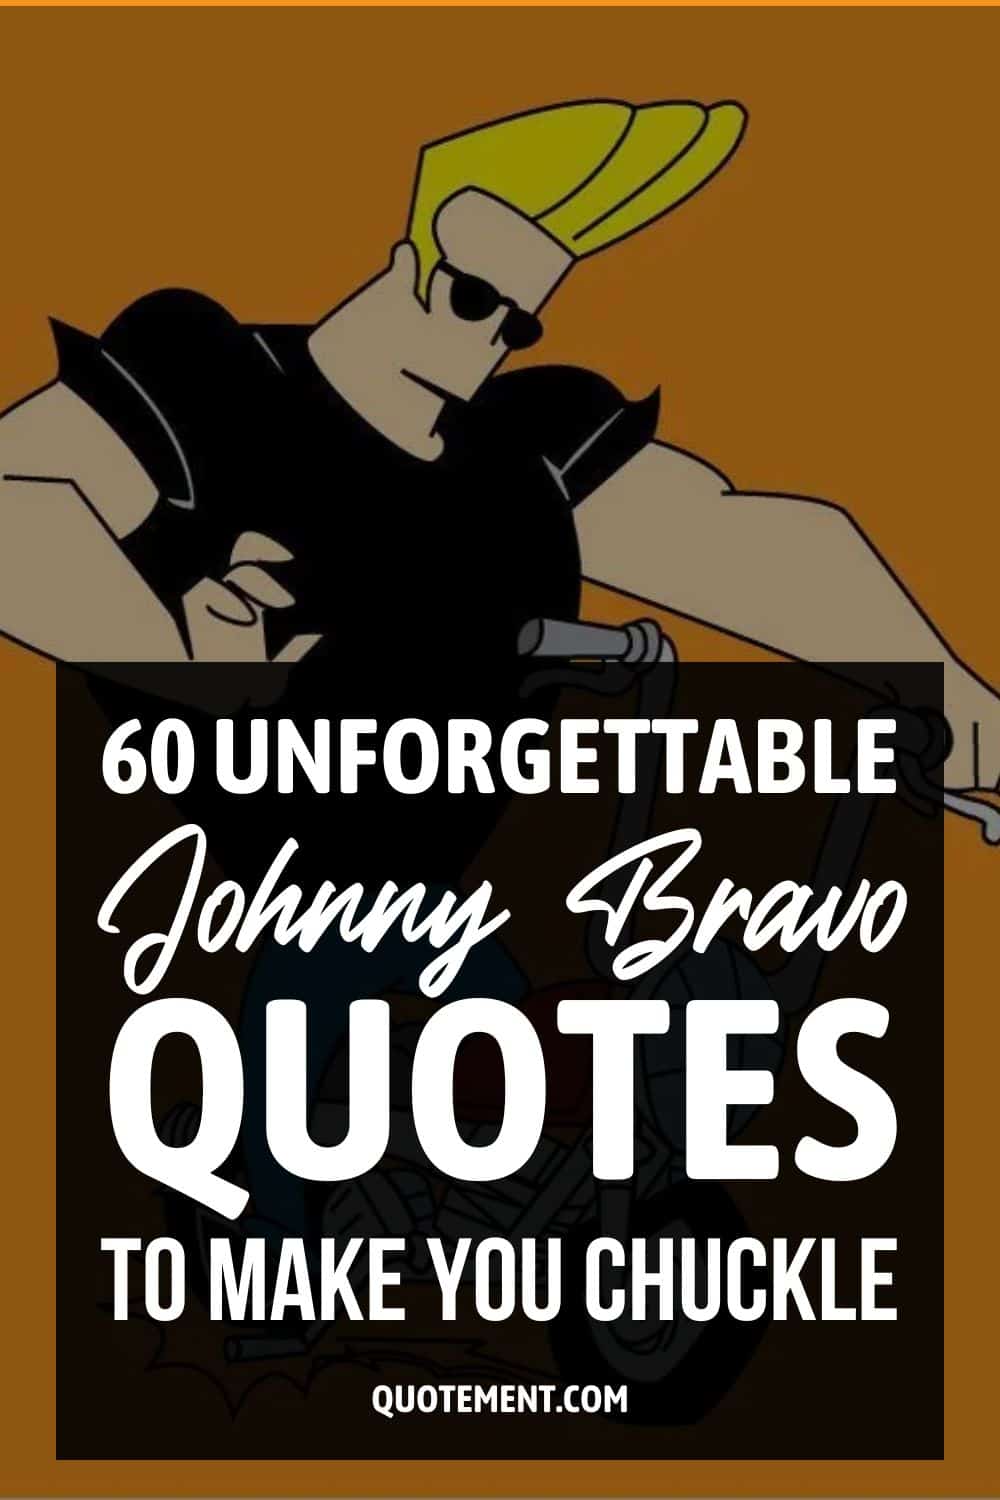 60 Unforgettable Johnny Bravo Quotes To Make You Chuckle
